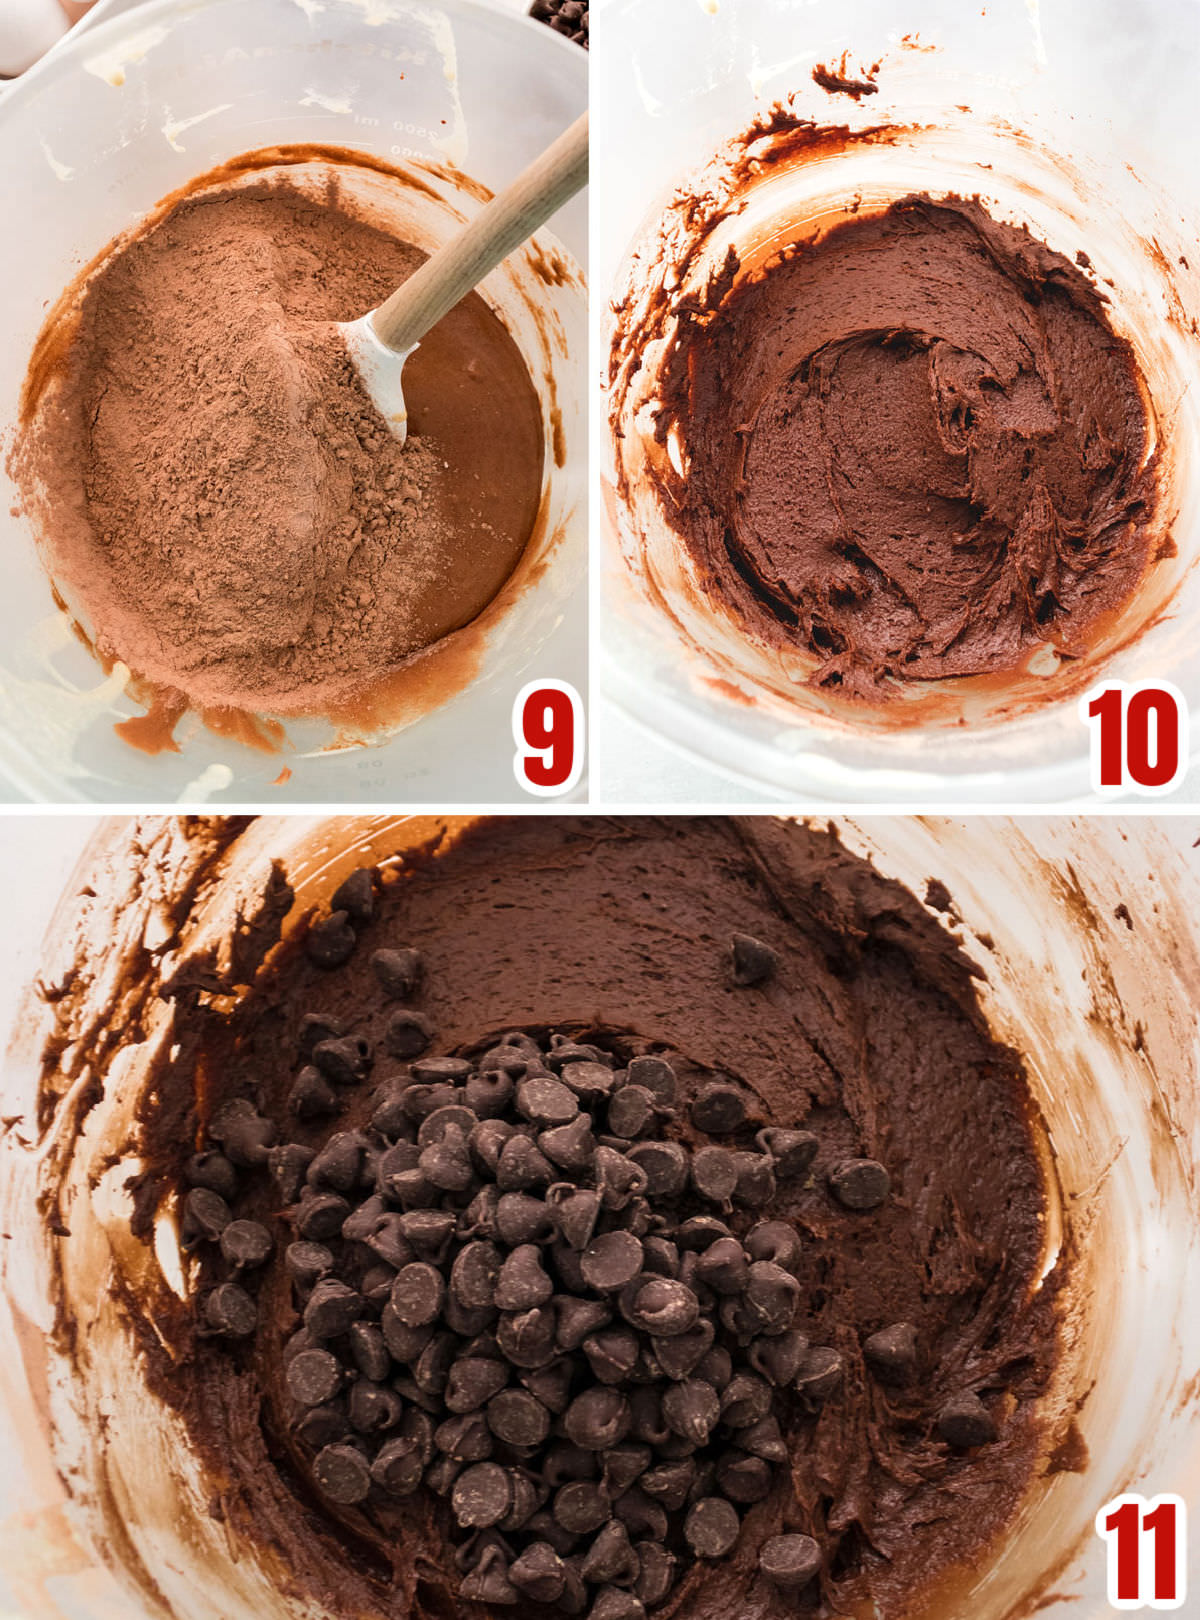 Collage image showing the steps for adding the dry ingredients and the chocolate chips to the cookie dough.